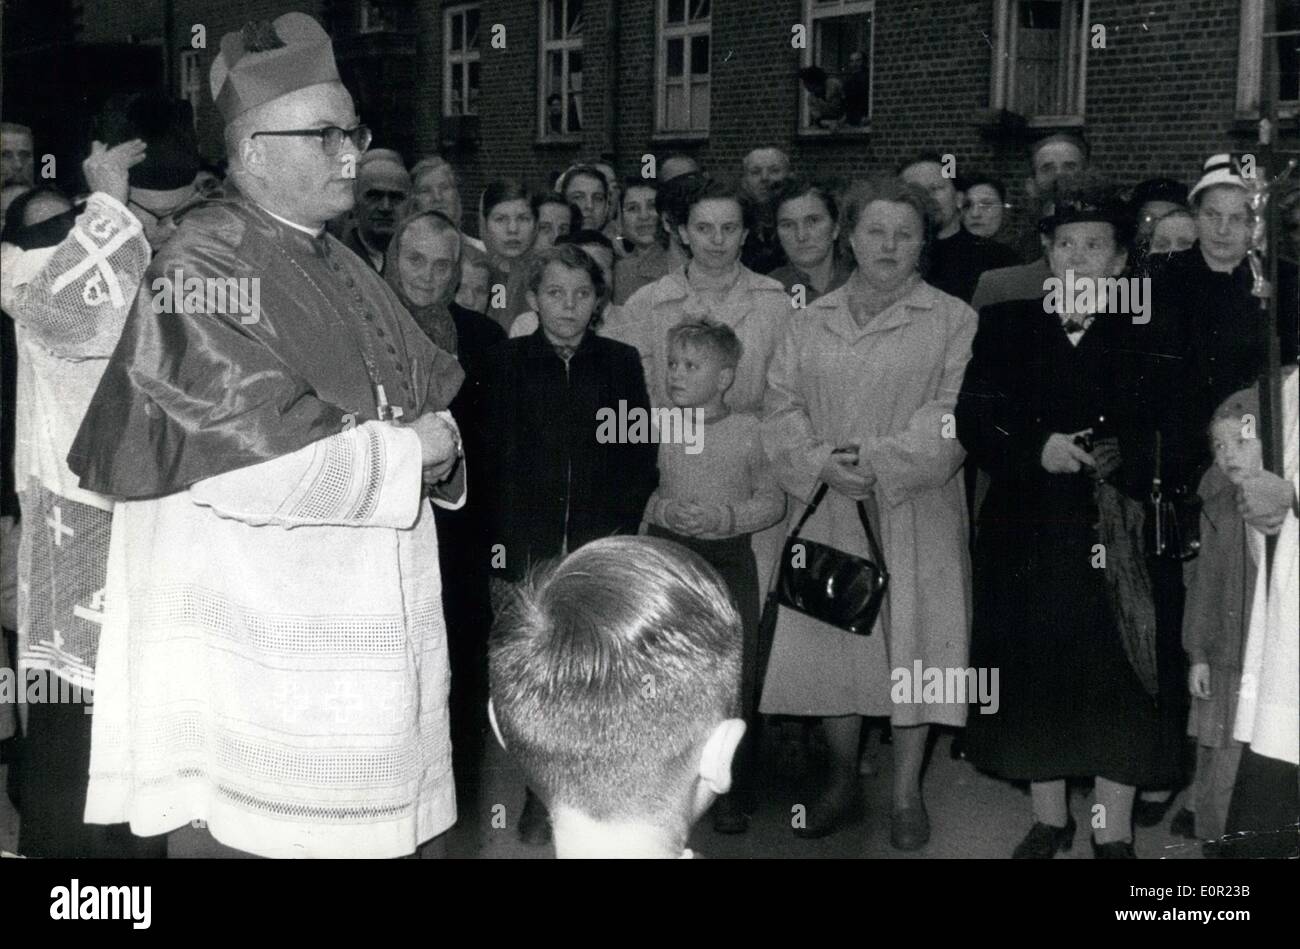 Oct. 10, 1957 - The largest refugee-camp of Europe... In Wentorf near Hamburg a visit was payed on Oct 5, 1957 by the new Bishop of Osnabrueck, Dr. Wittler, who celebrated a pontifical mass in the chapel of the camp. This visit - payed on the third day after being ordained bishop of Osnabrueck - shows the affection of Dr. Wittler towards the refugees who bear such heavy burden. The camp Wentorf has at present a population of approx. 10000 refugees and expels who are awaiting their admission by the Nordrhein-Wesfalia authorities. OPS:- Bishop Dr. Wittler at Camp Wentorf. Stock Photo